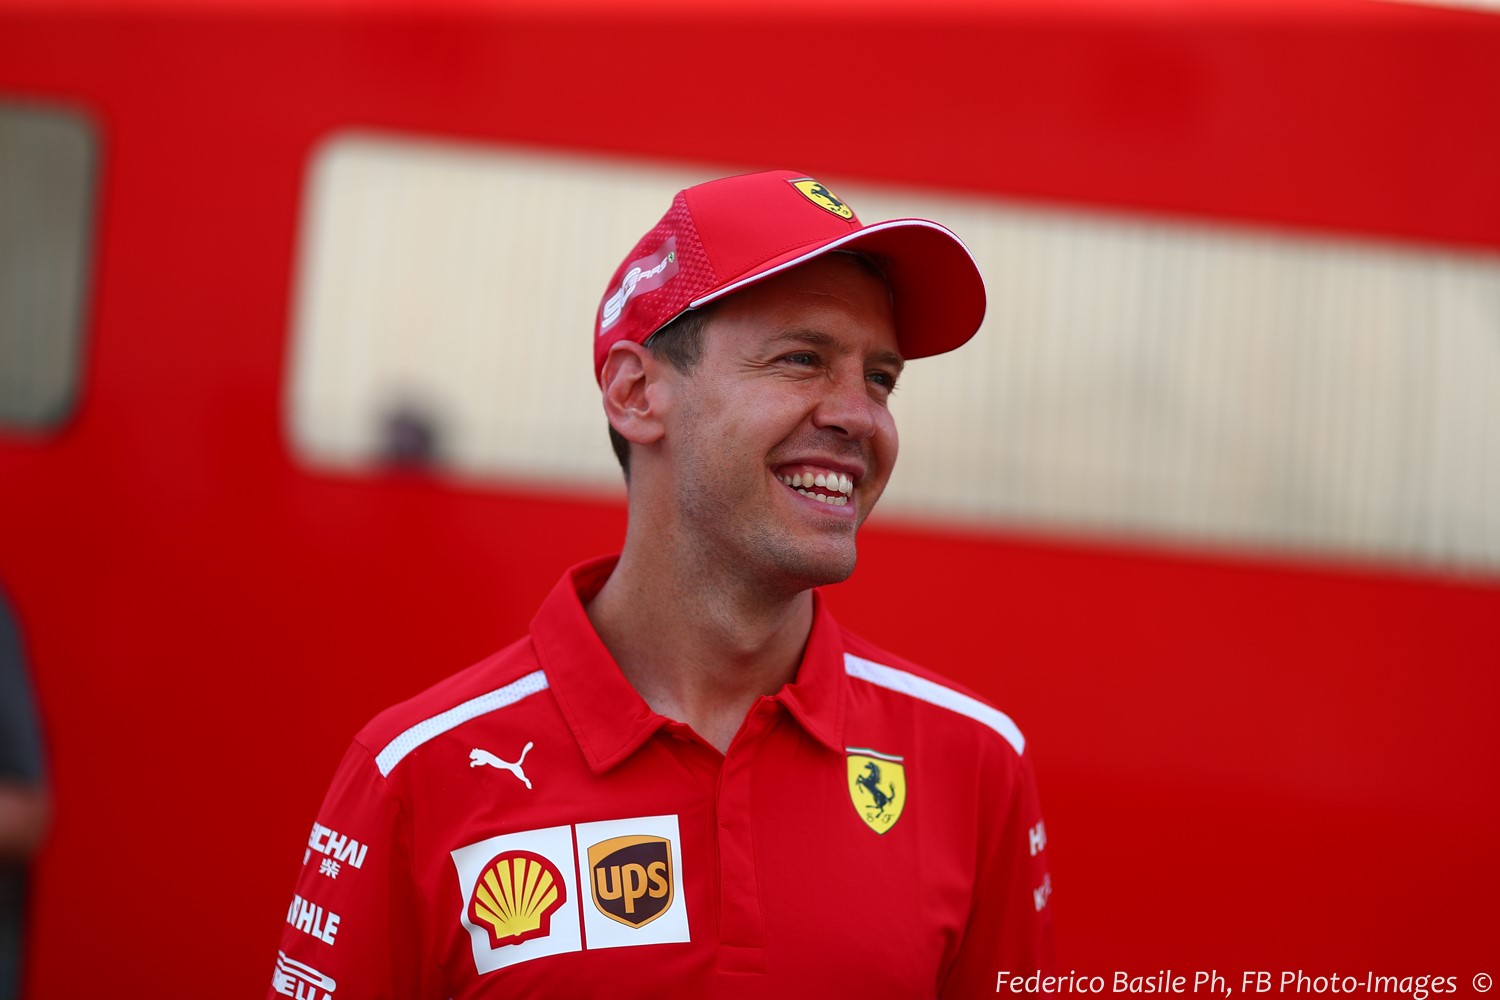 If Sebastian Vettel cannot land a top ride at Mercedes he will leave F1